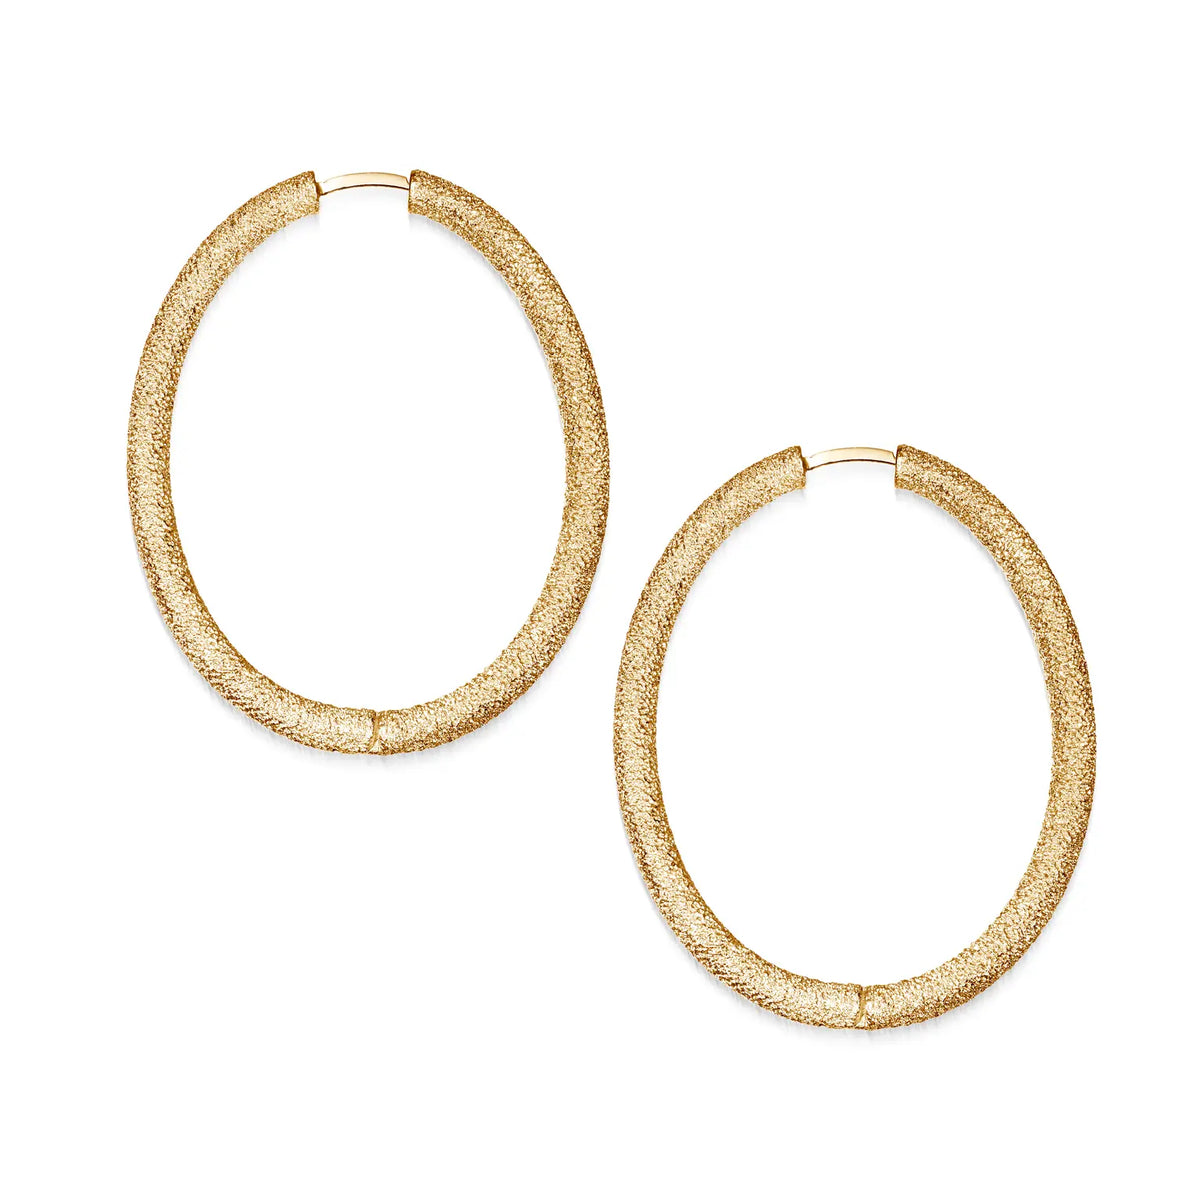 Large Oval Florentine Hoop Earrings - Squash Blossom Vail